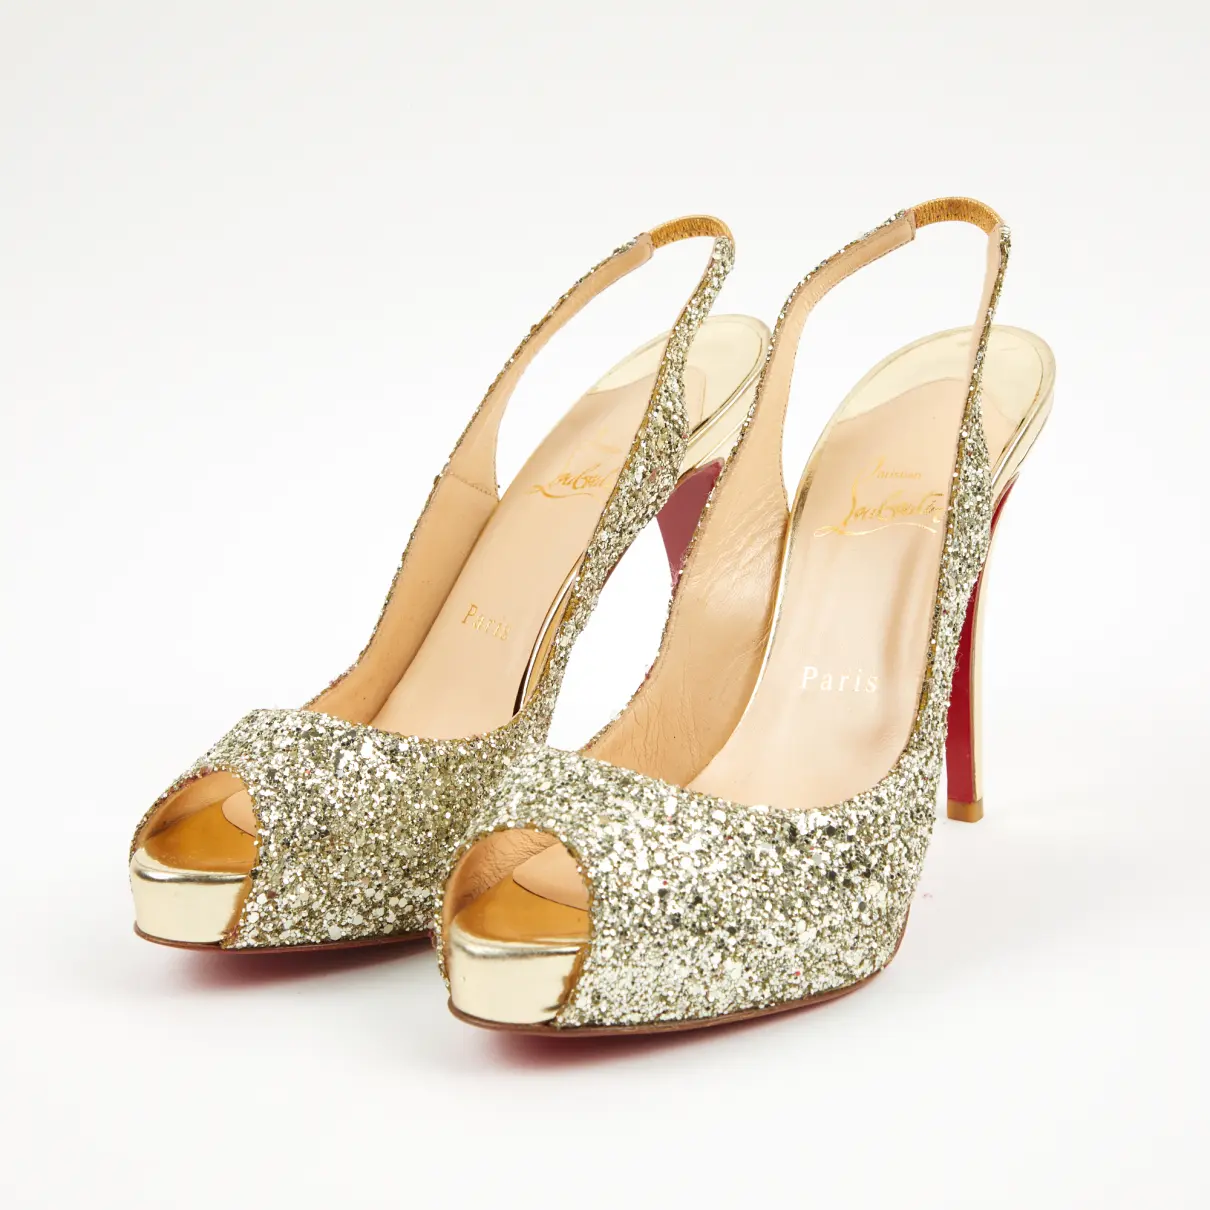 Buy Christian Louboutin Private Number glitter heels online